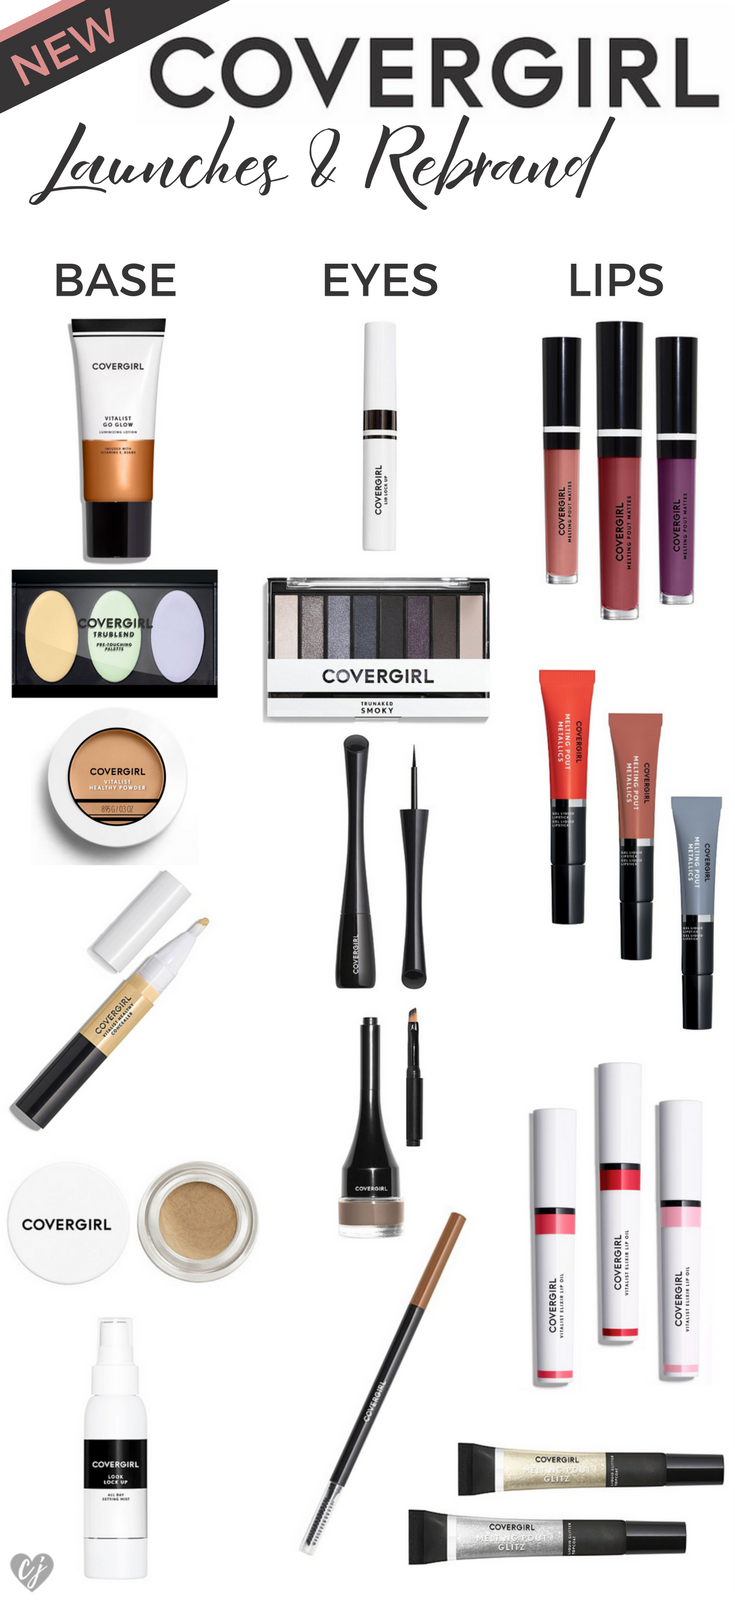 new covergirl launches & rebrand